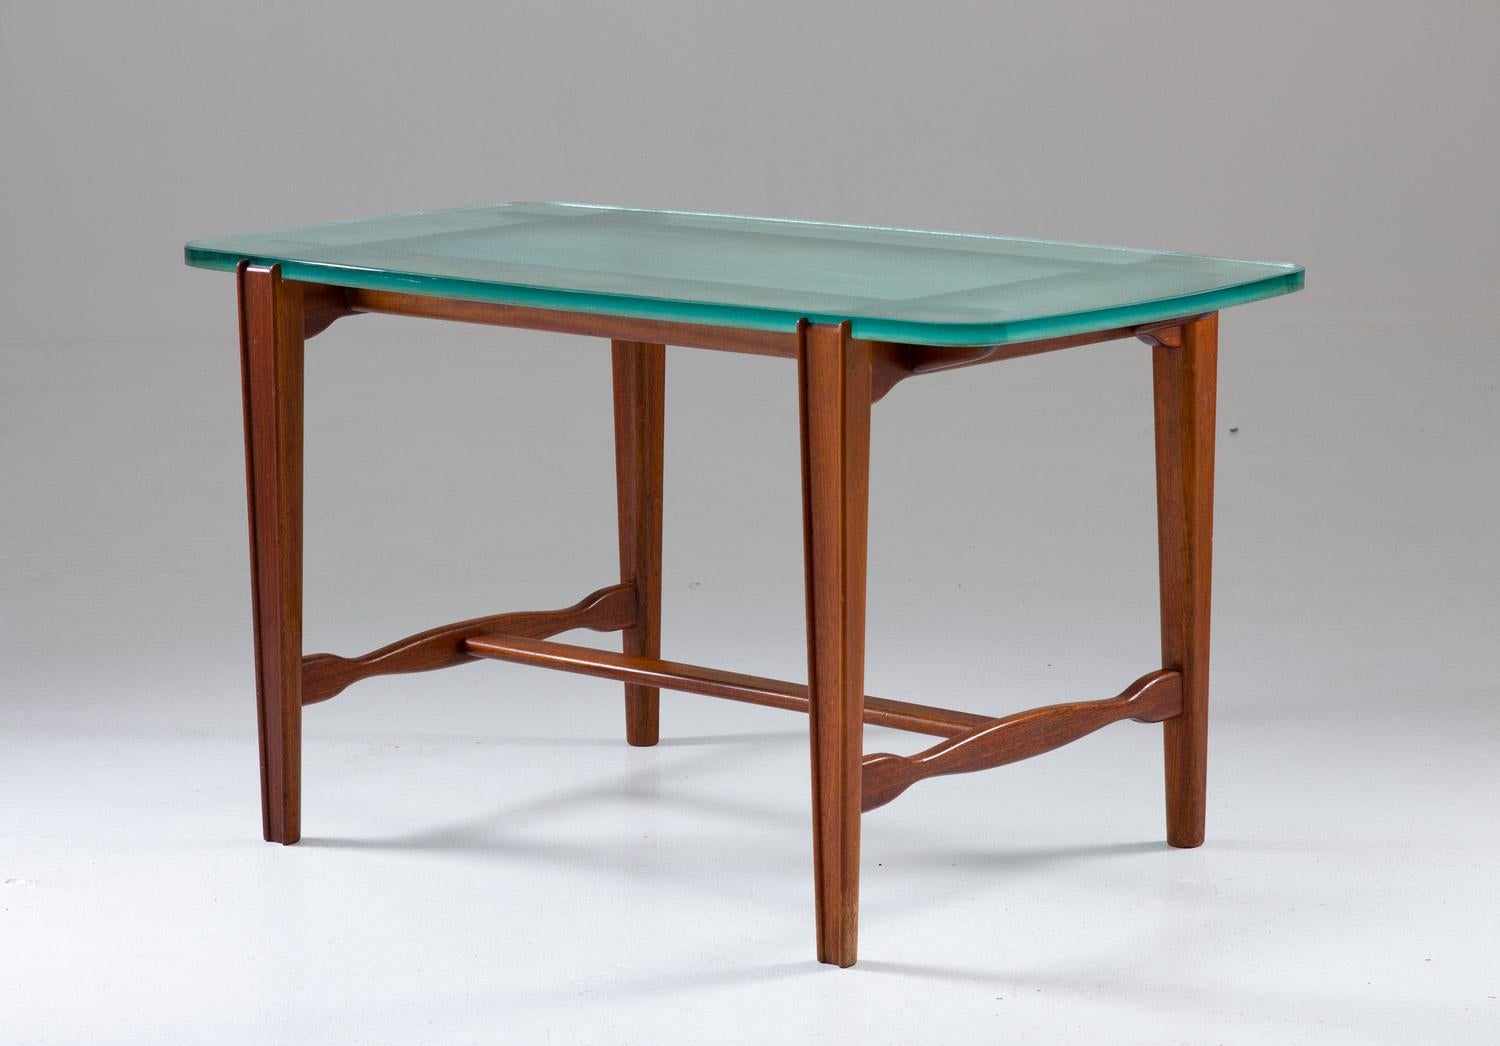 Beautiful coffee or side table on mahogany and glass by unknown Swedish manufacturer, circa 1940.
The table consists of a thick raw-glass table top, supported by a mahogany frame/legs. The thickness of the glass top gives an exclusive impression